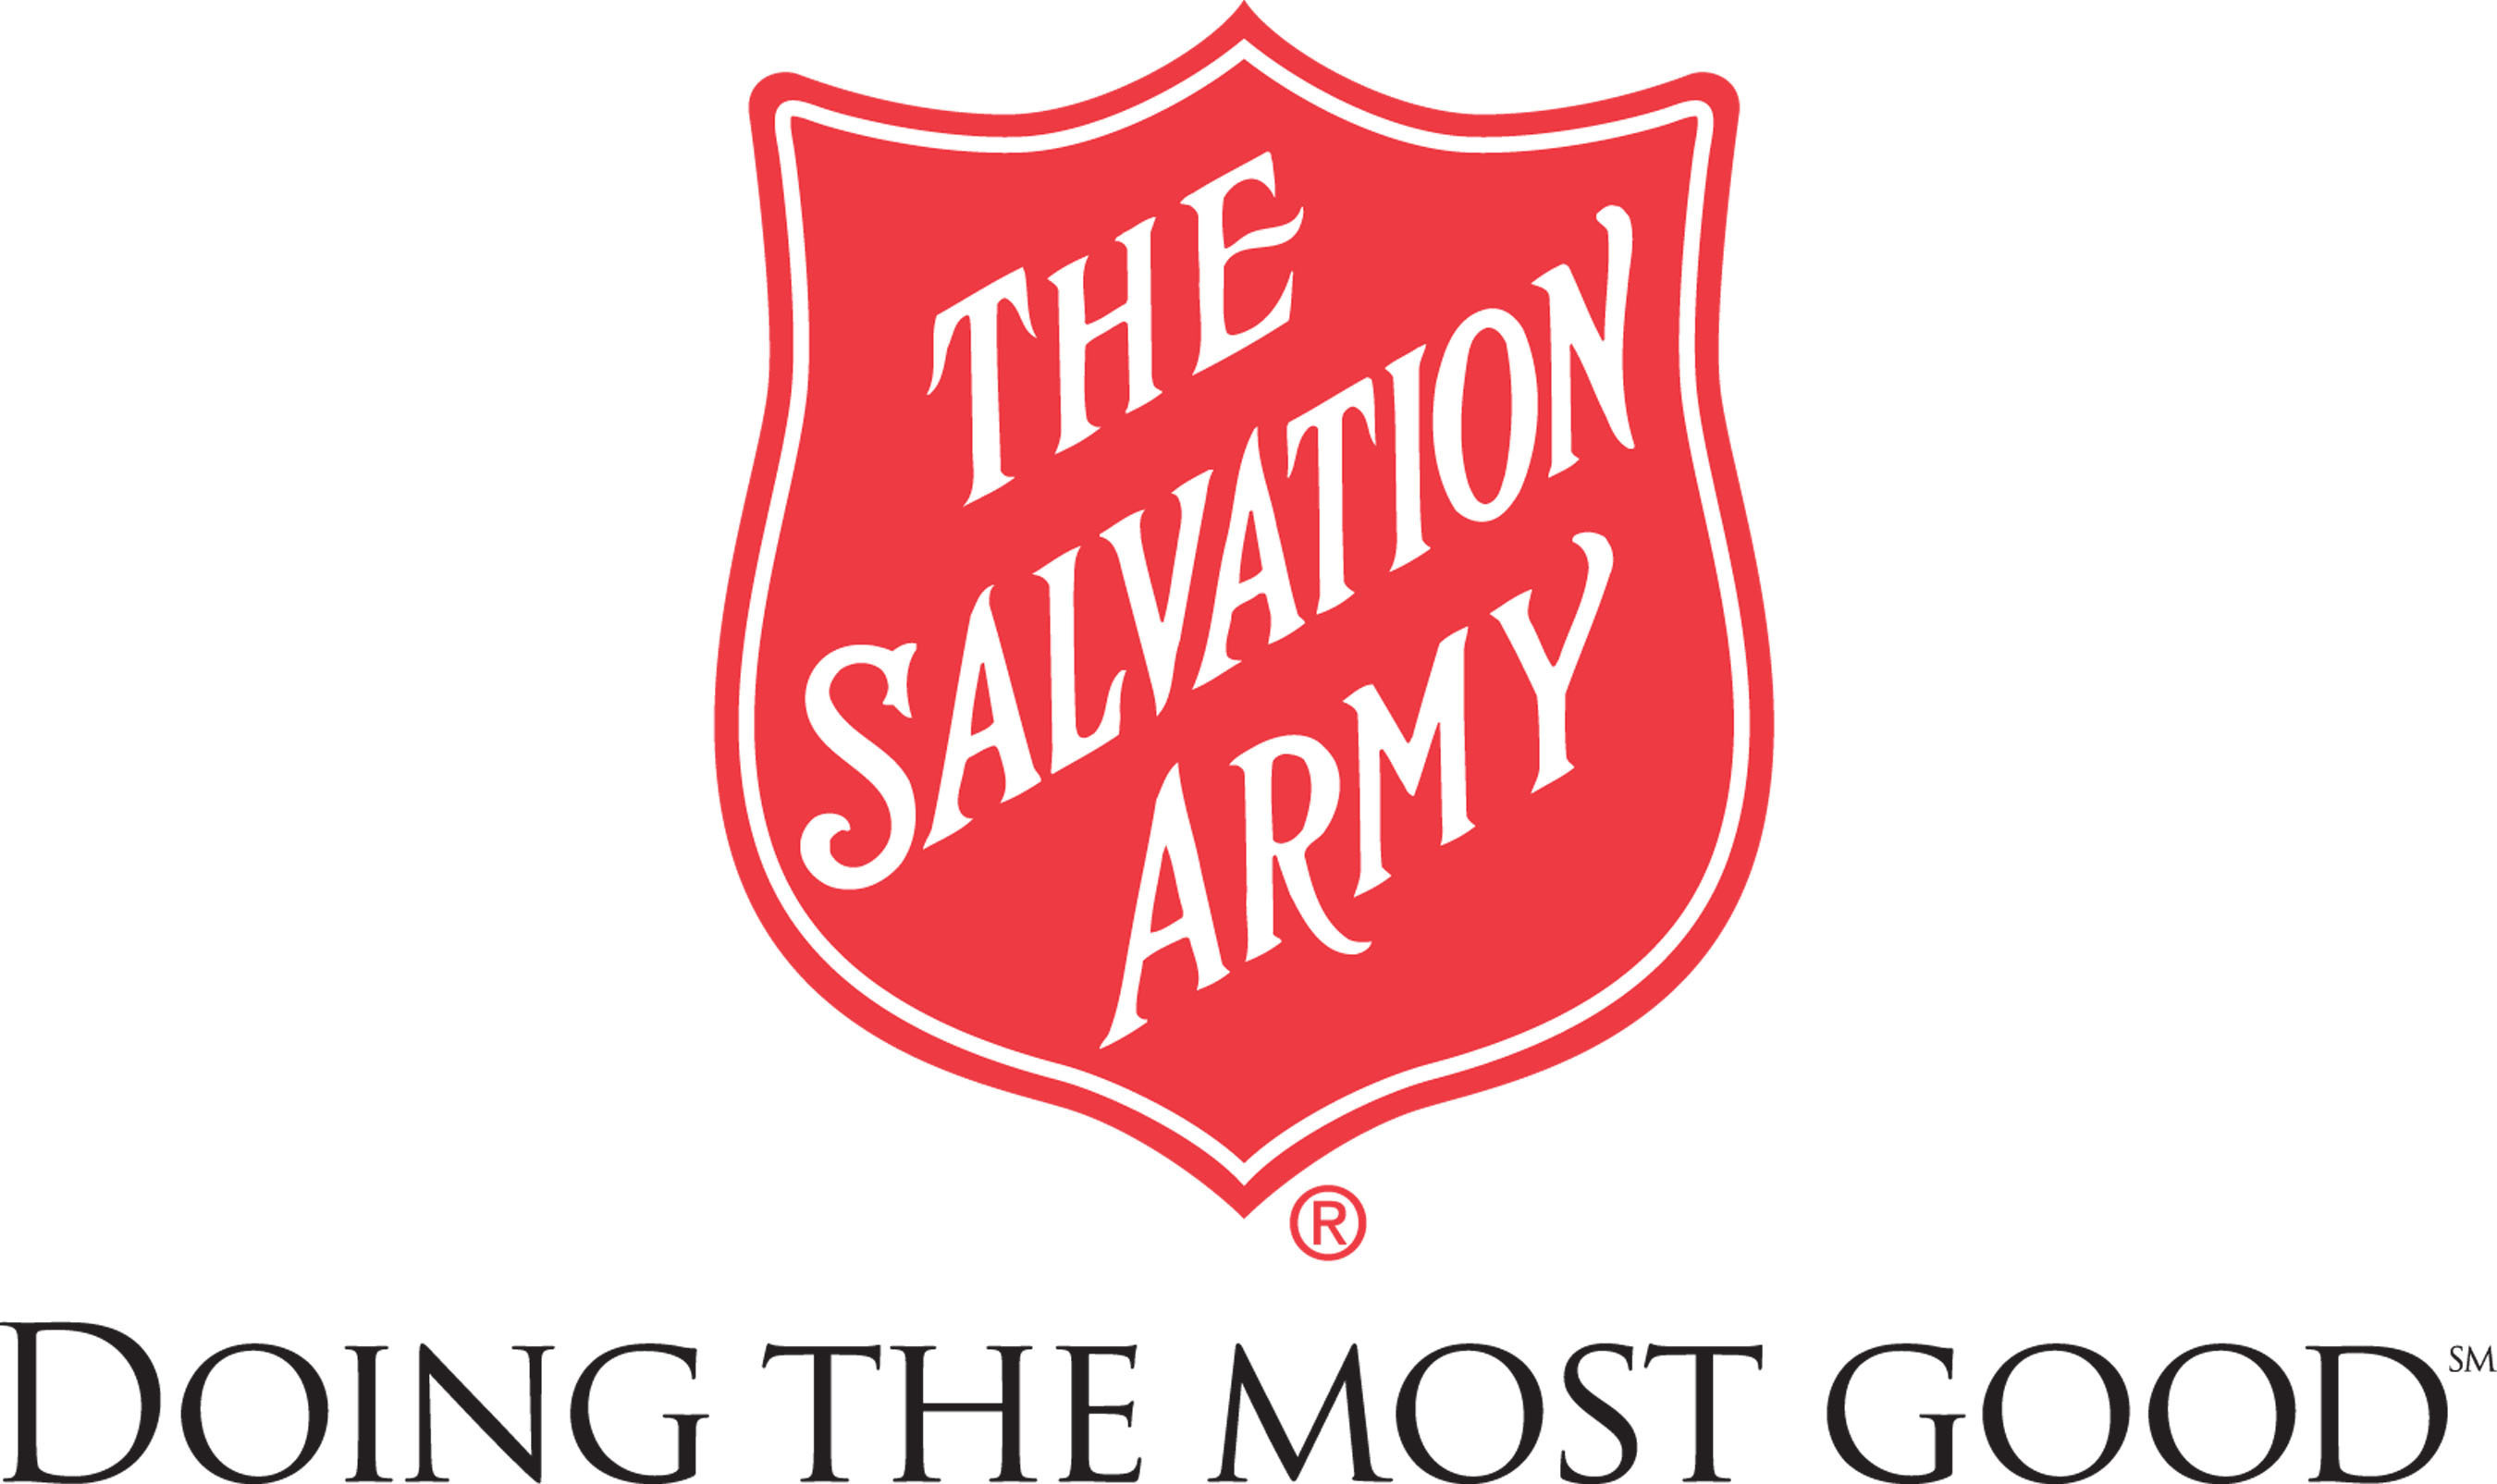 THE SALVATION ARMY LOGO